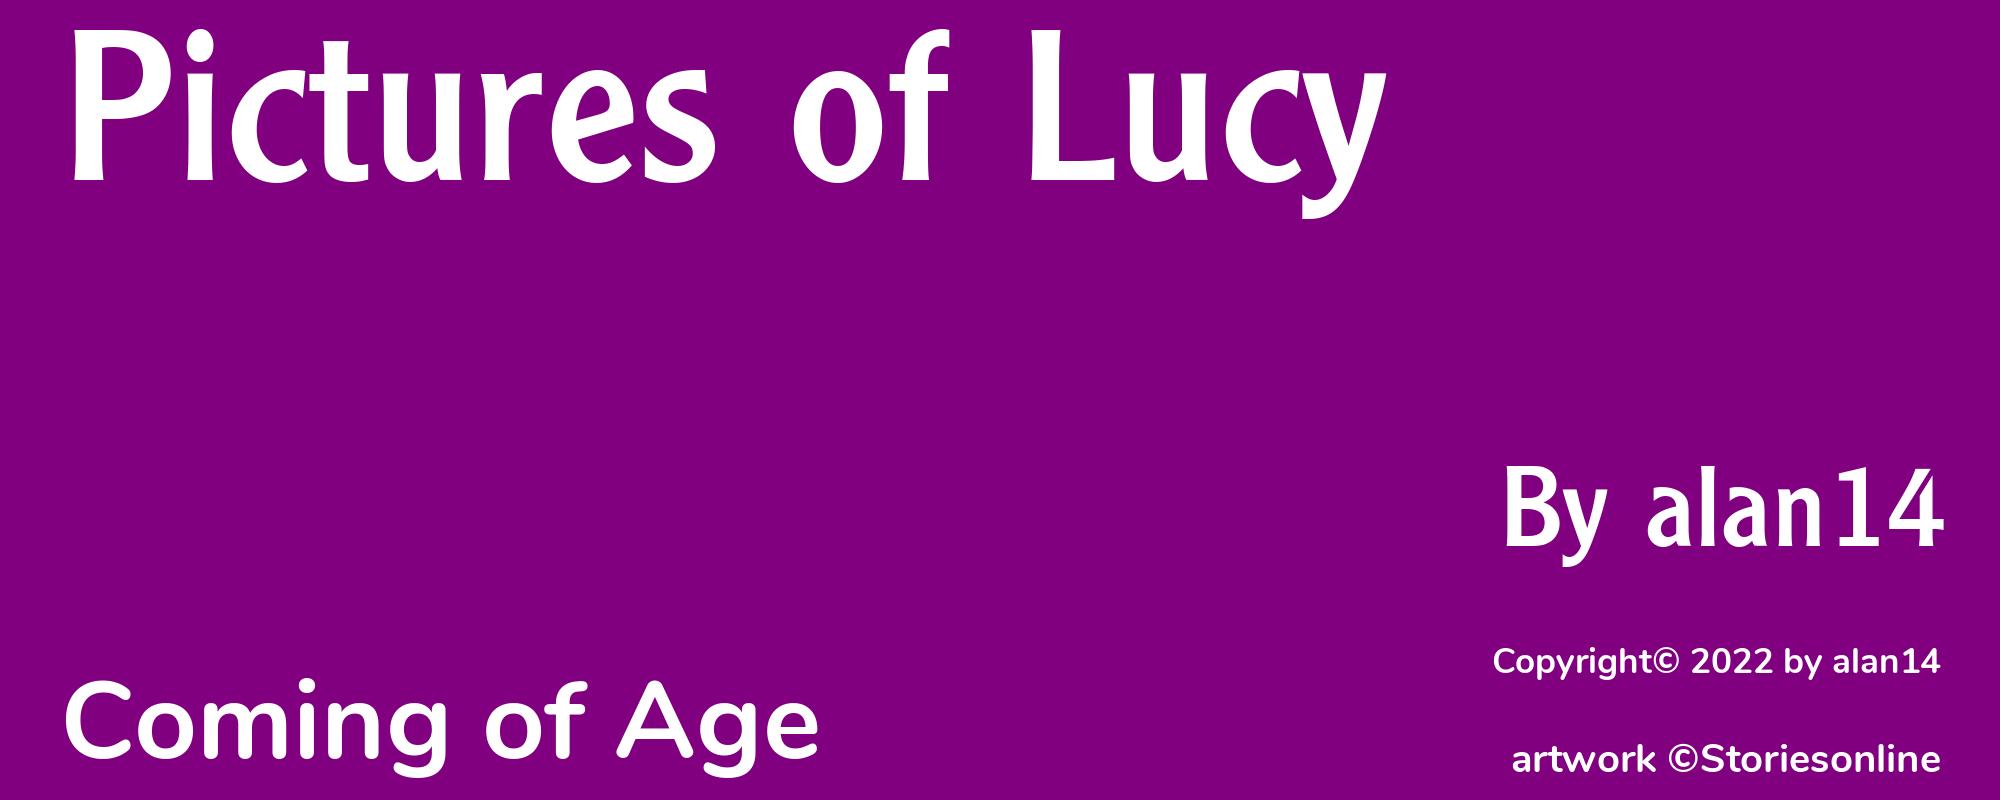 Pictures of Lucy - Cover